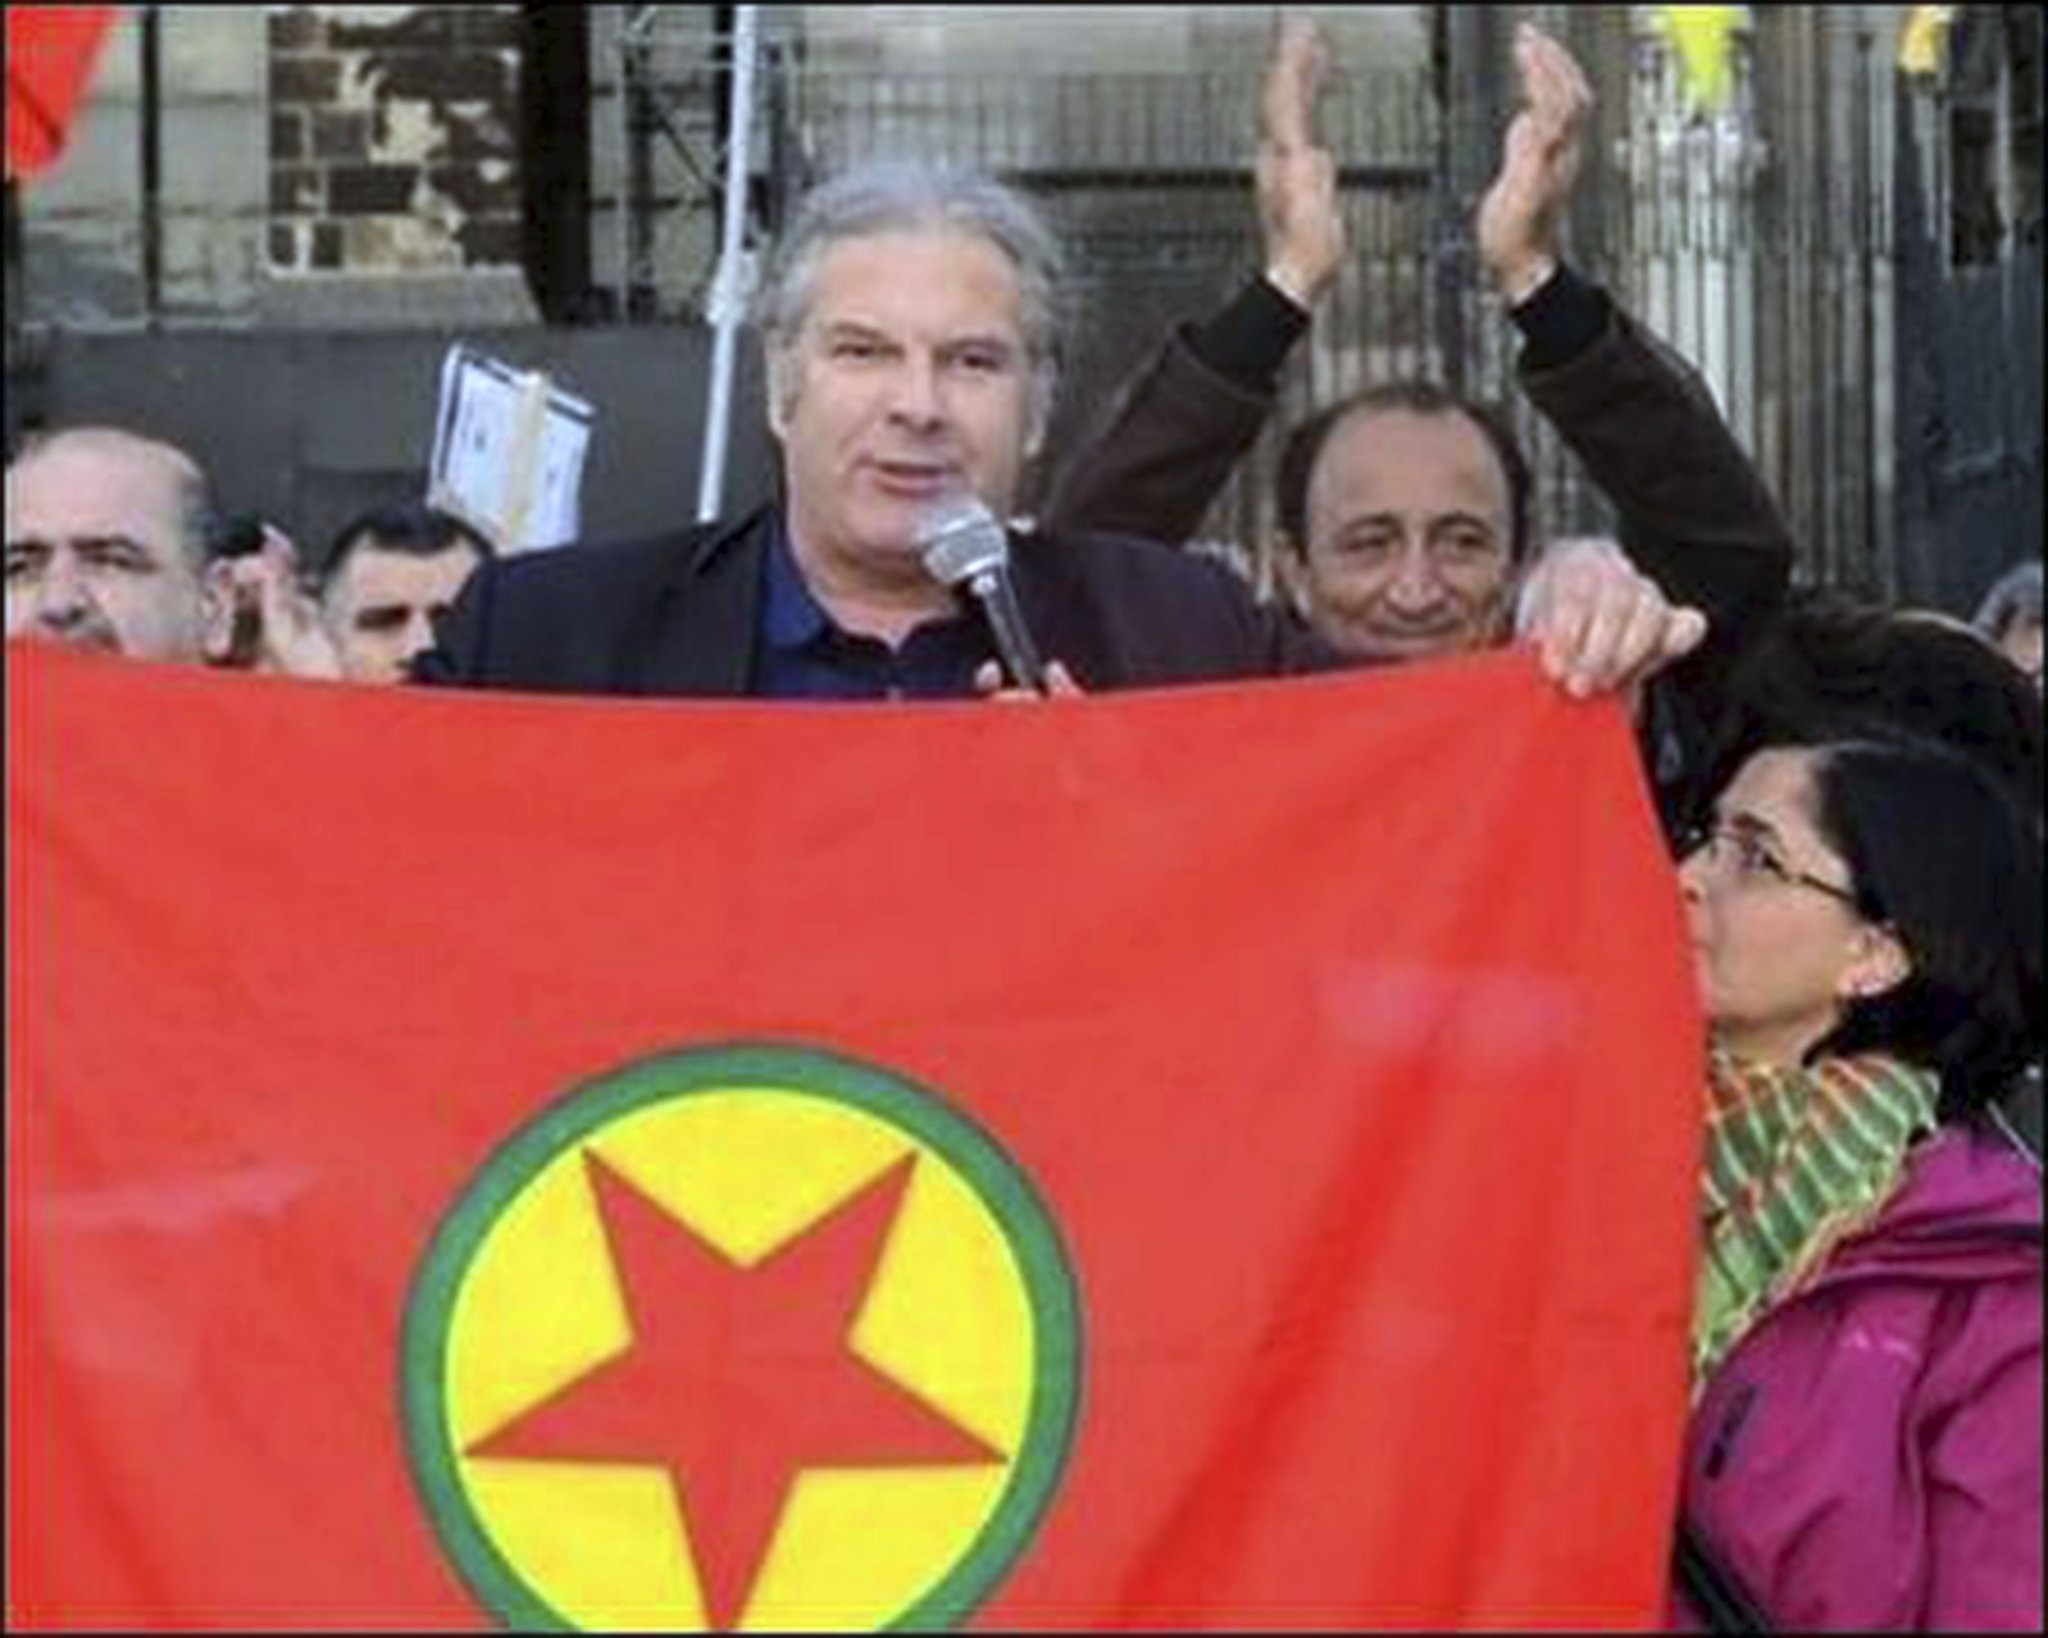 This file photo shows Andrej Hunko holding the banner of the PKK, which is listed as a terrorist group by Turkey and Germany.